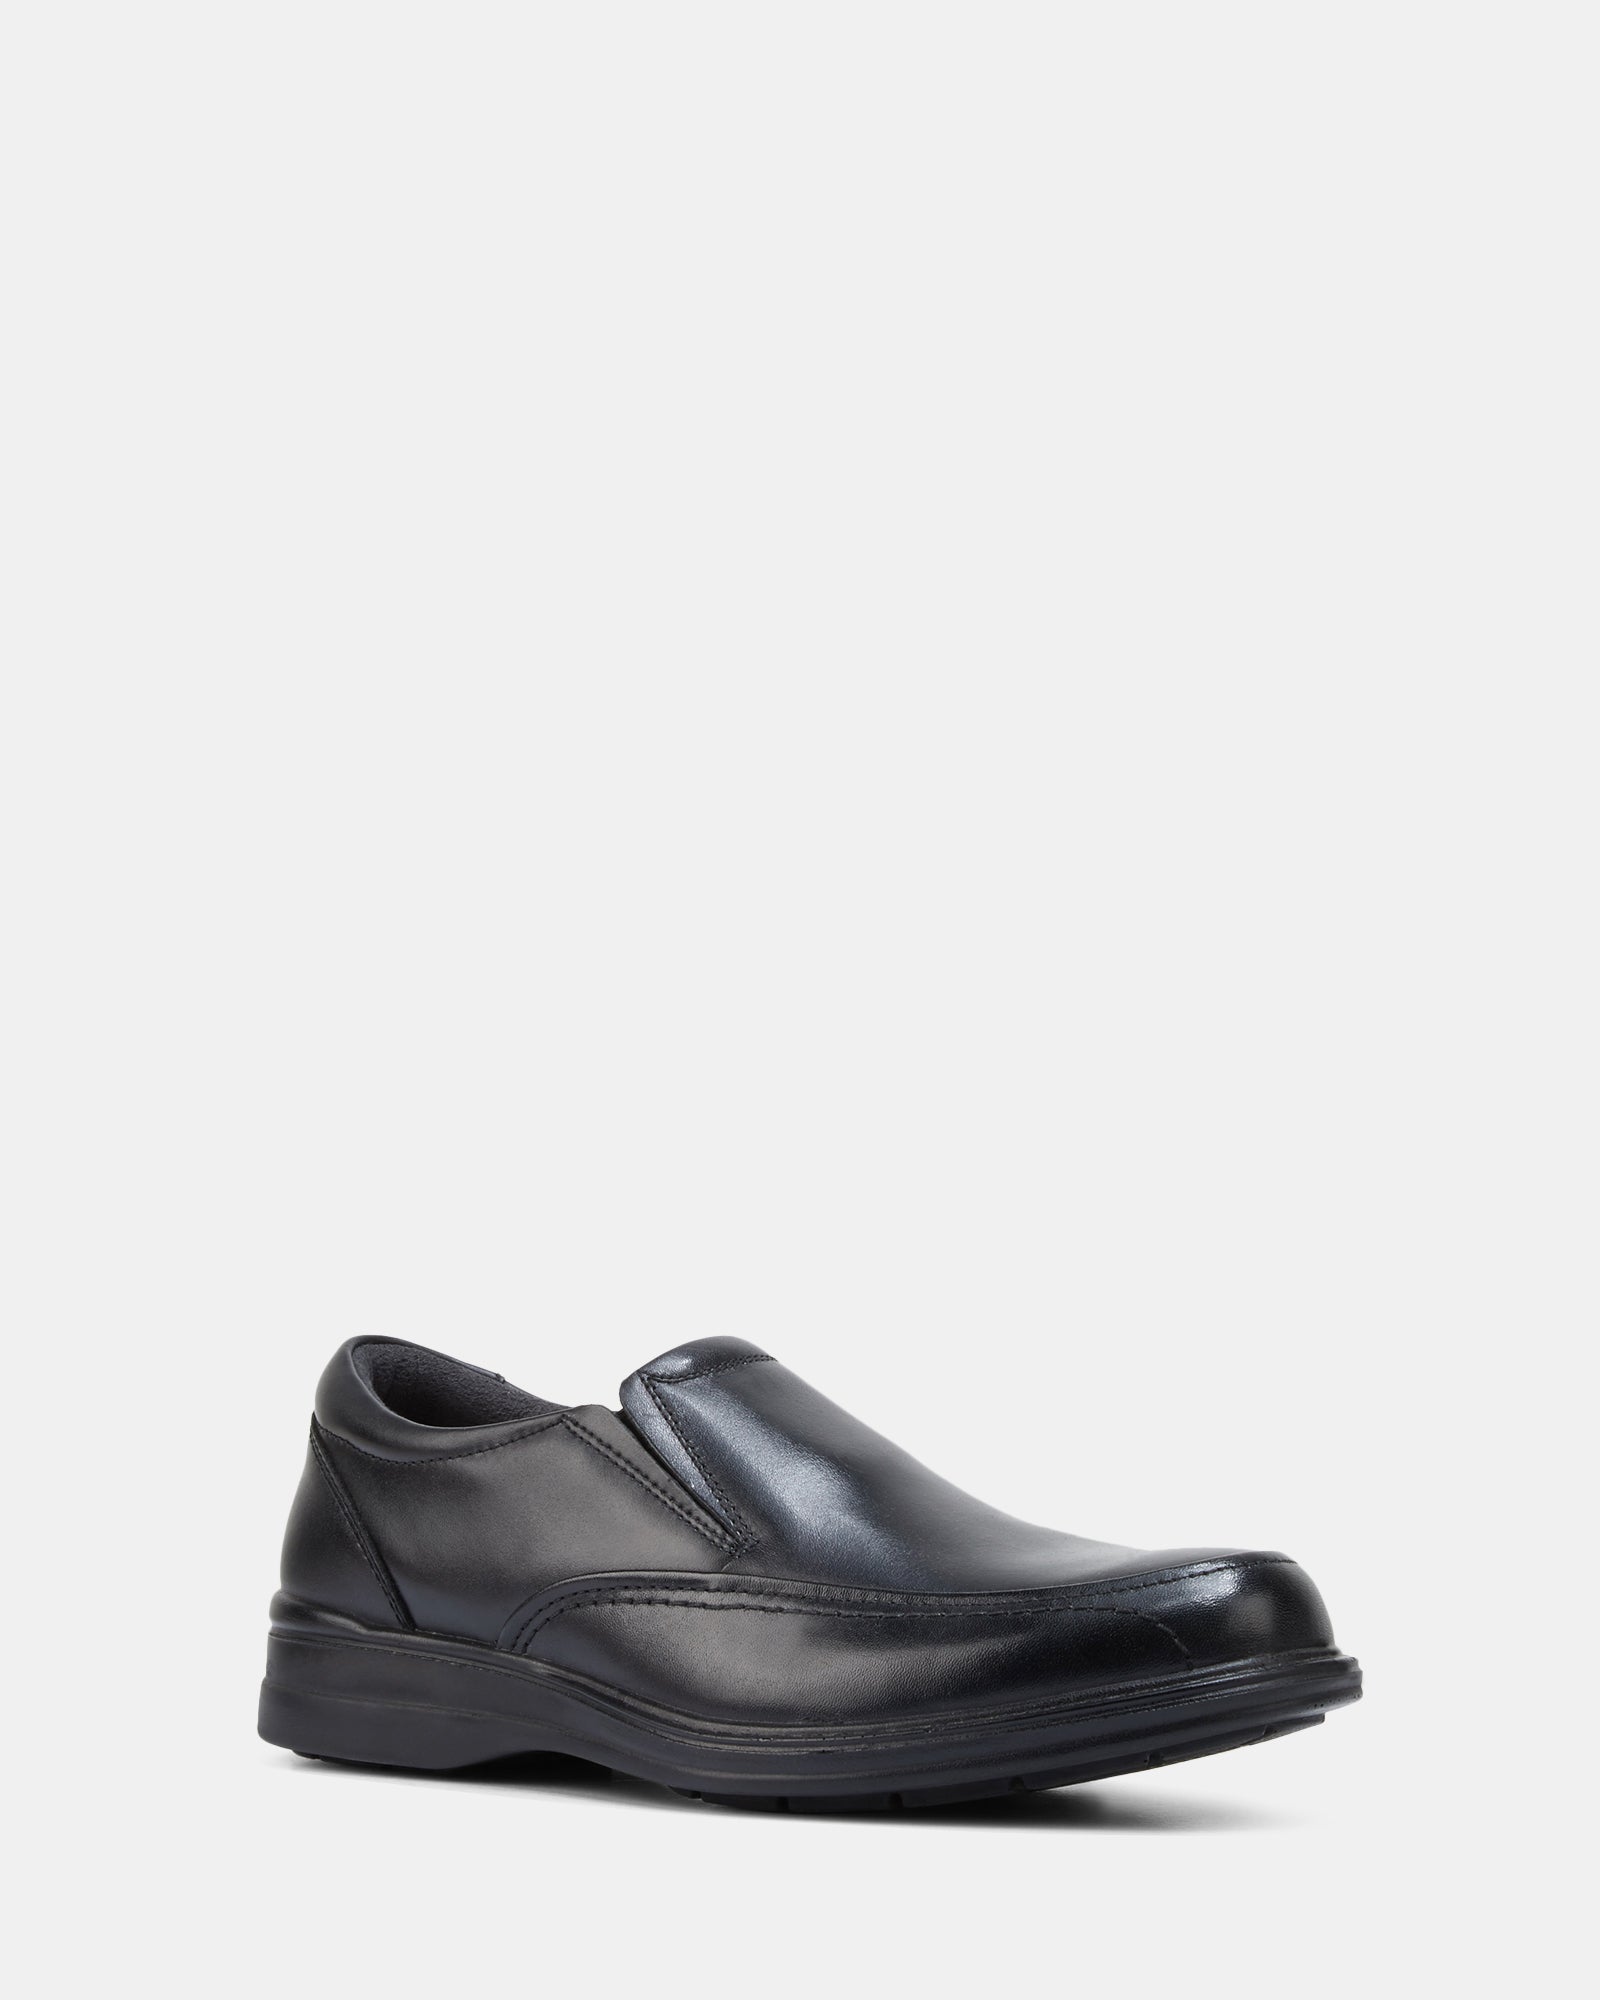 Comfort Bliss Patent Tab Loafer